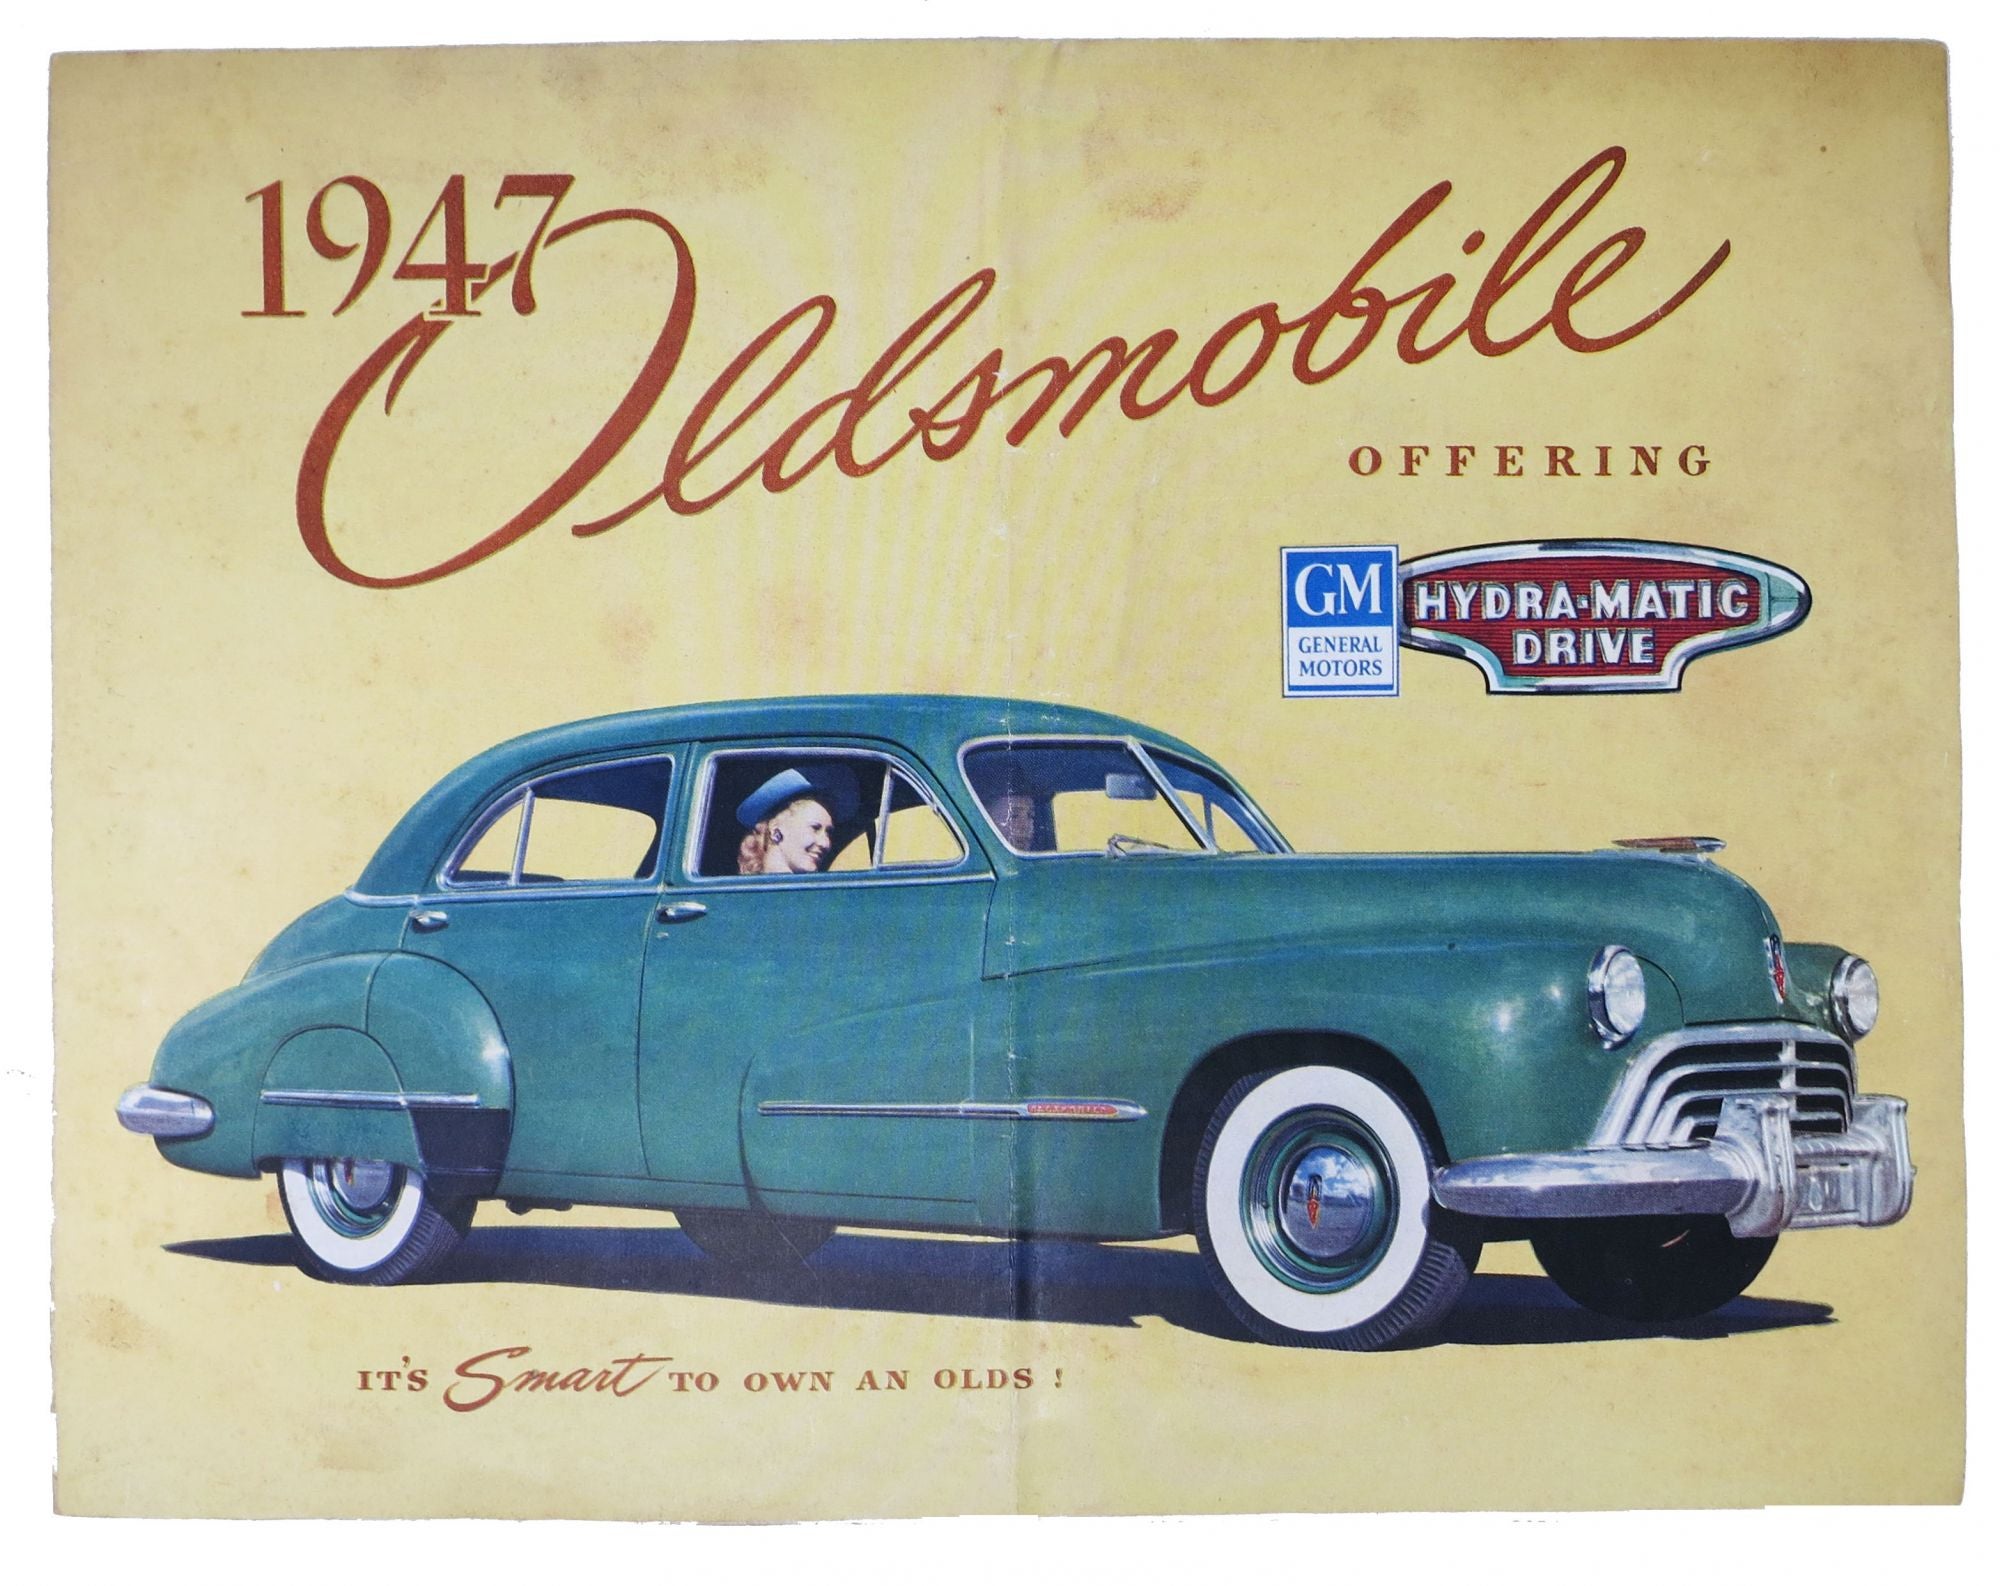 [Automotive Promotional Brochure] - 1947 OLDSMOBILE Offering GM General Motors Hydra-matic Drive.; It's SMART To Own an Olds!